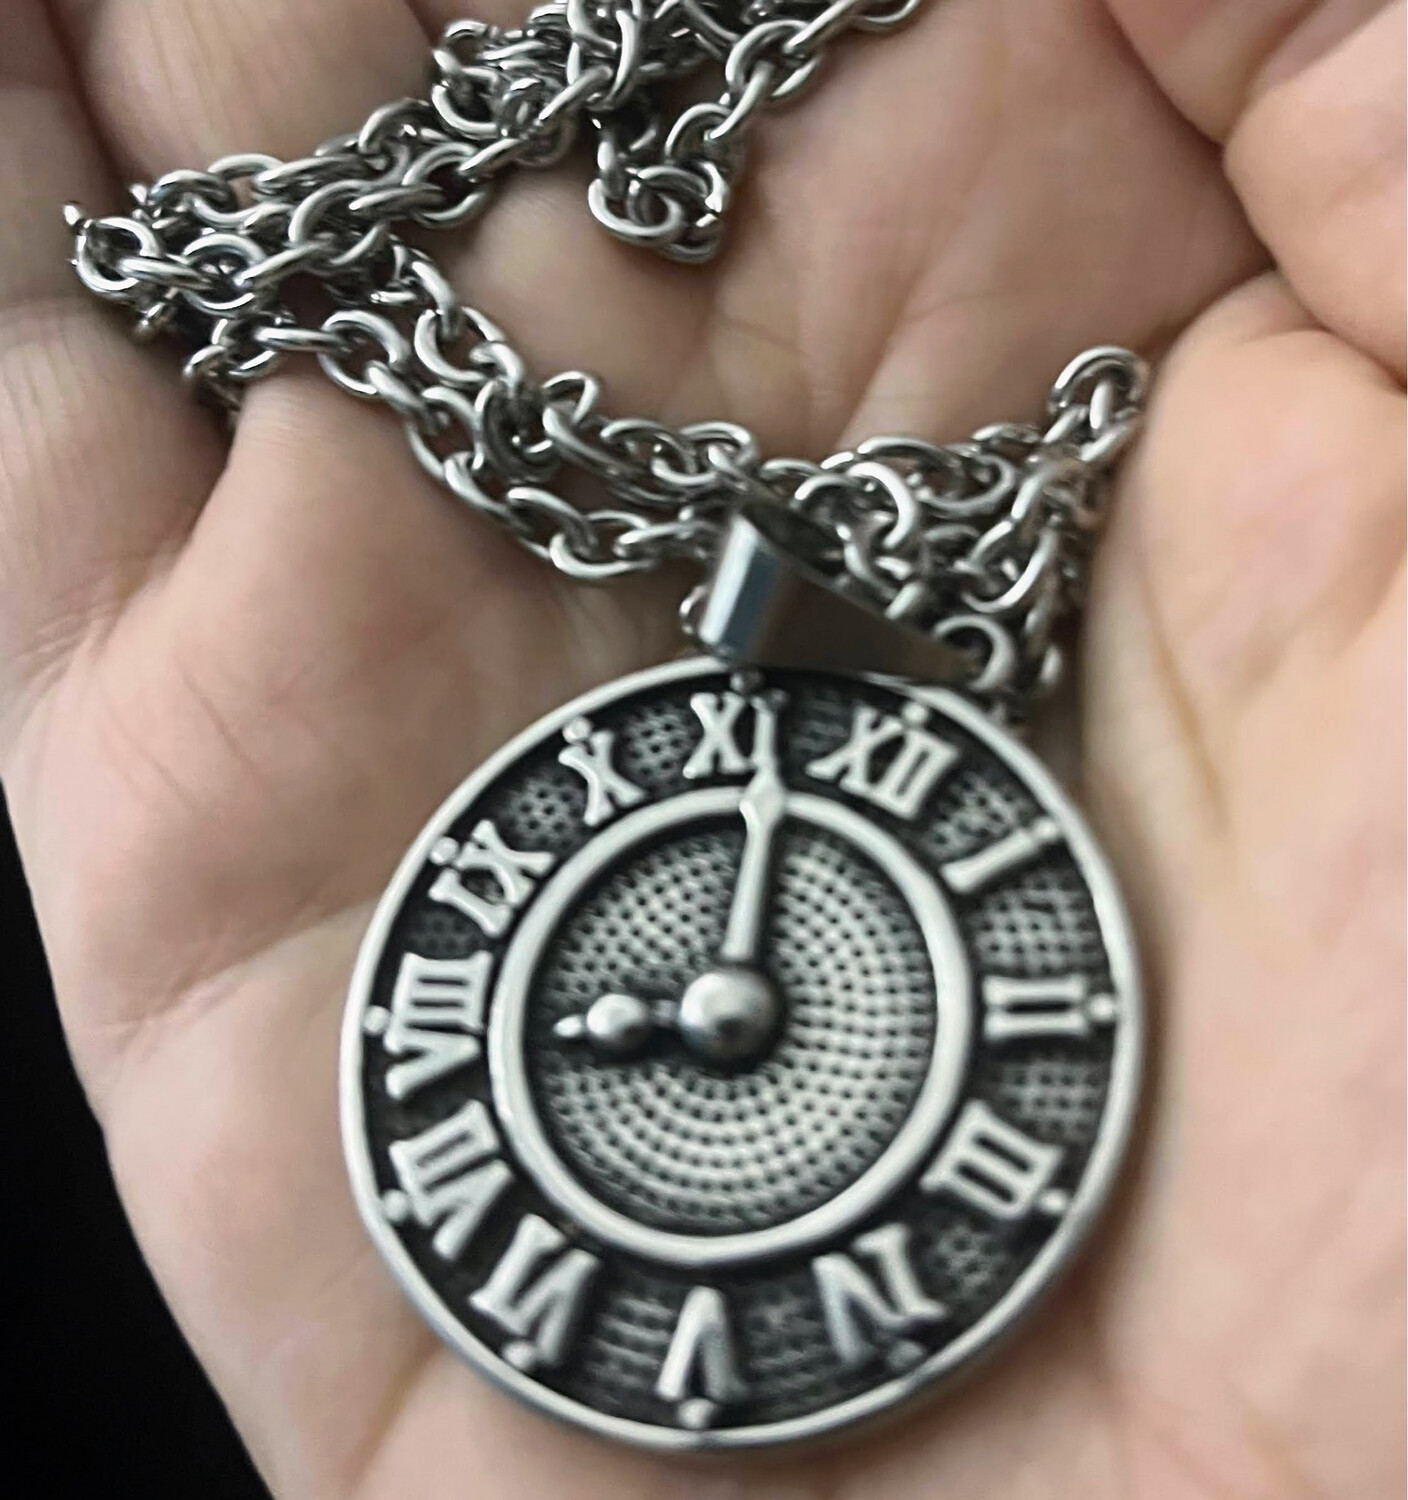 Solid Stainless Steampunk Steel Time Pendant And Stainless Steel Chain